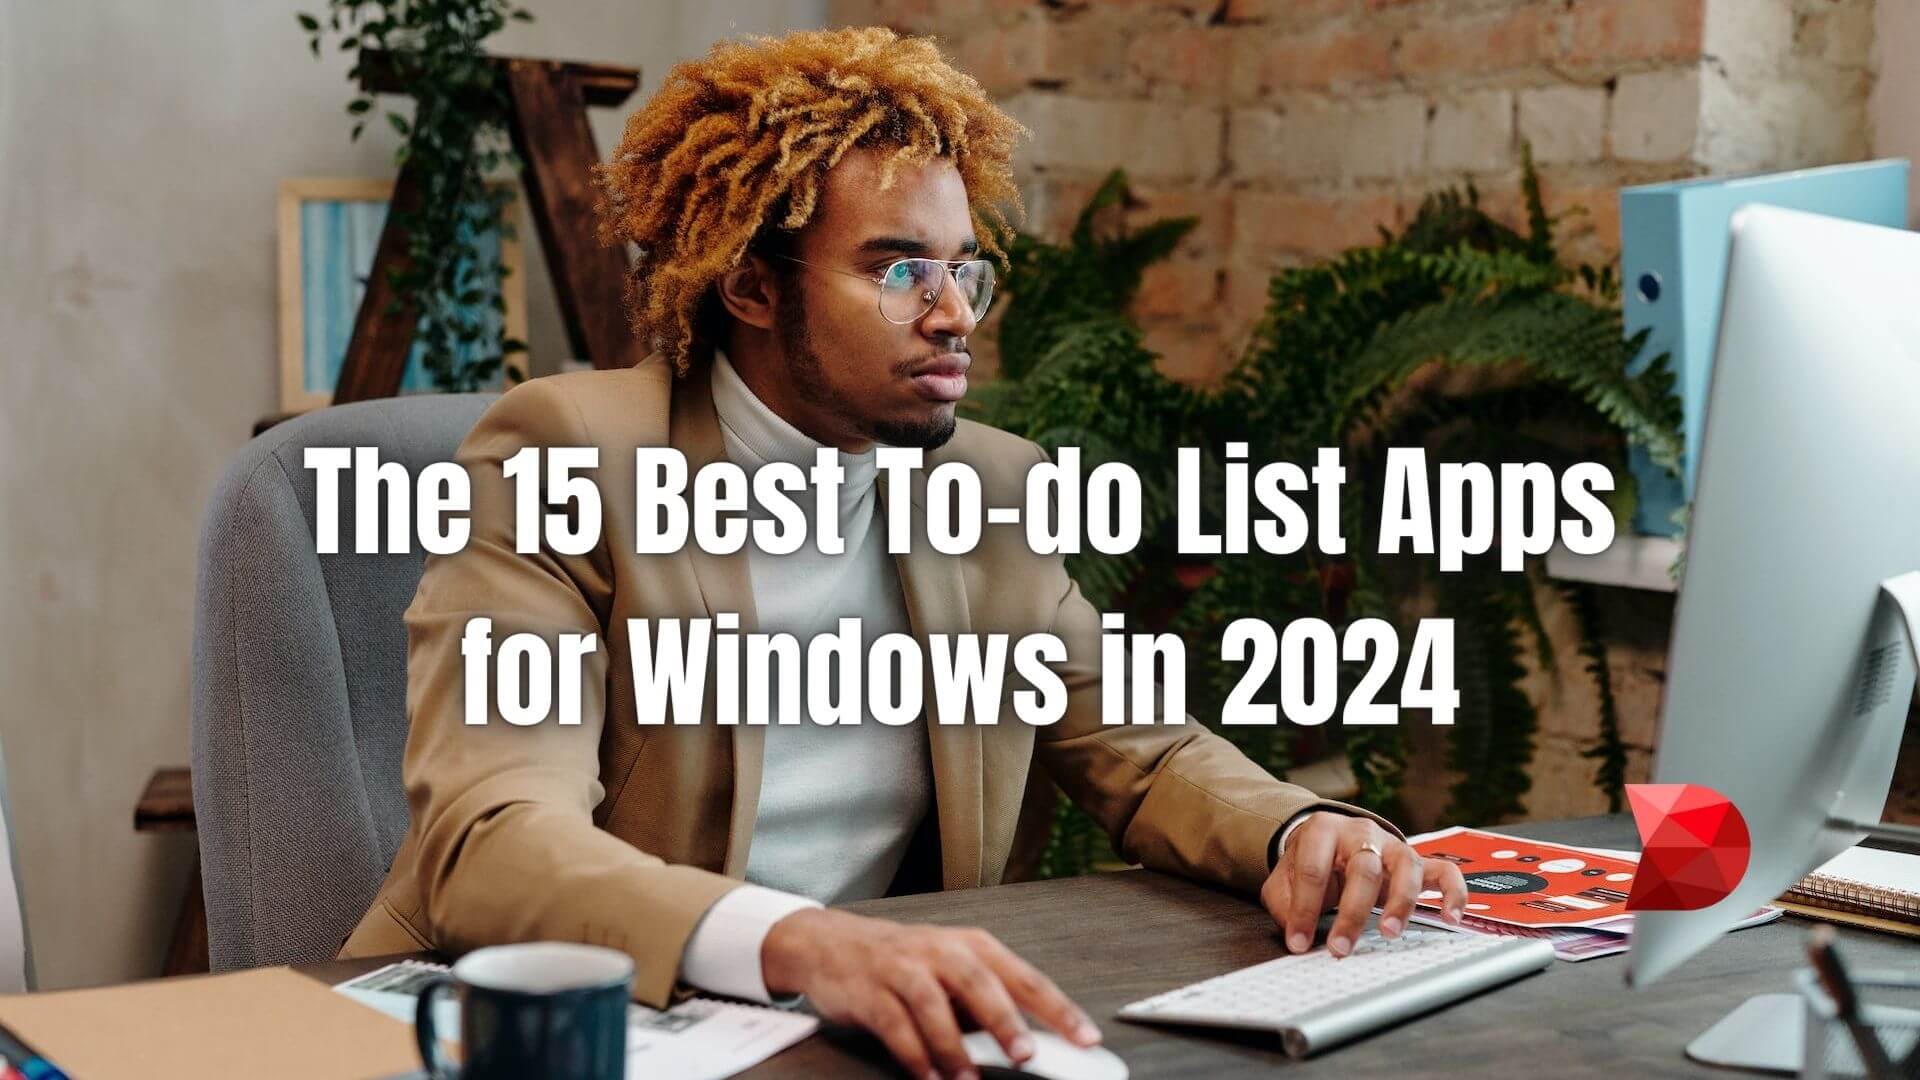 Navigate the digital task management landscape with ease! Click here to uncover the 15 best Windows to-do list apps of 2024.